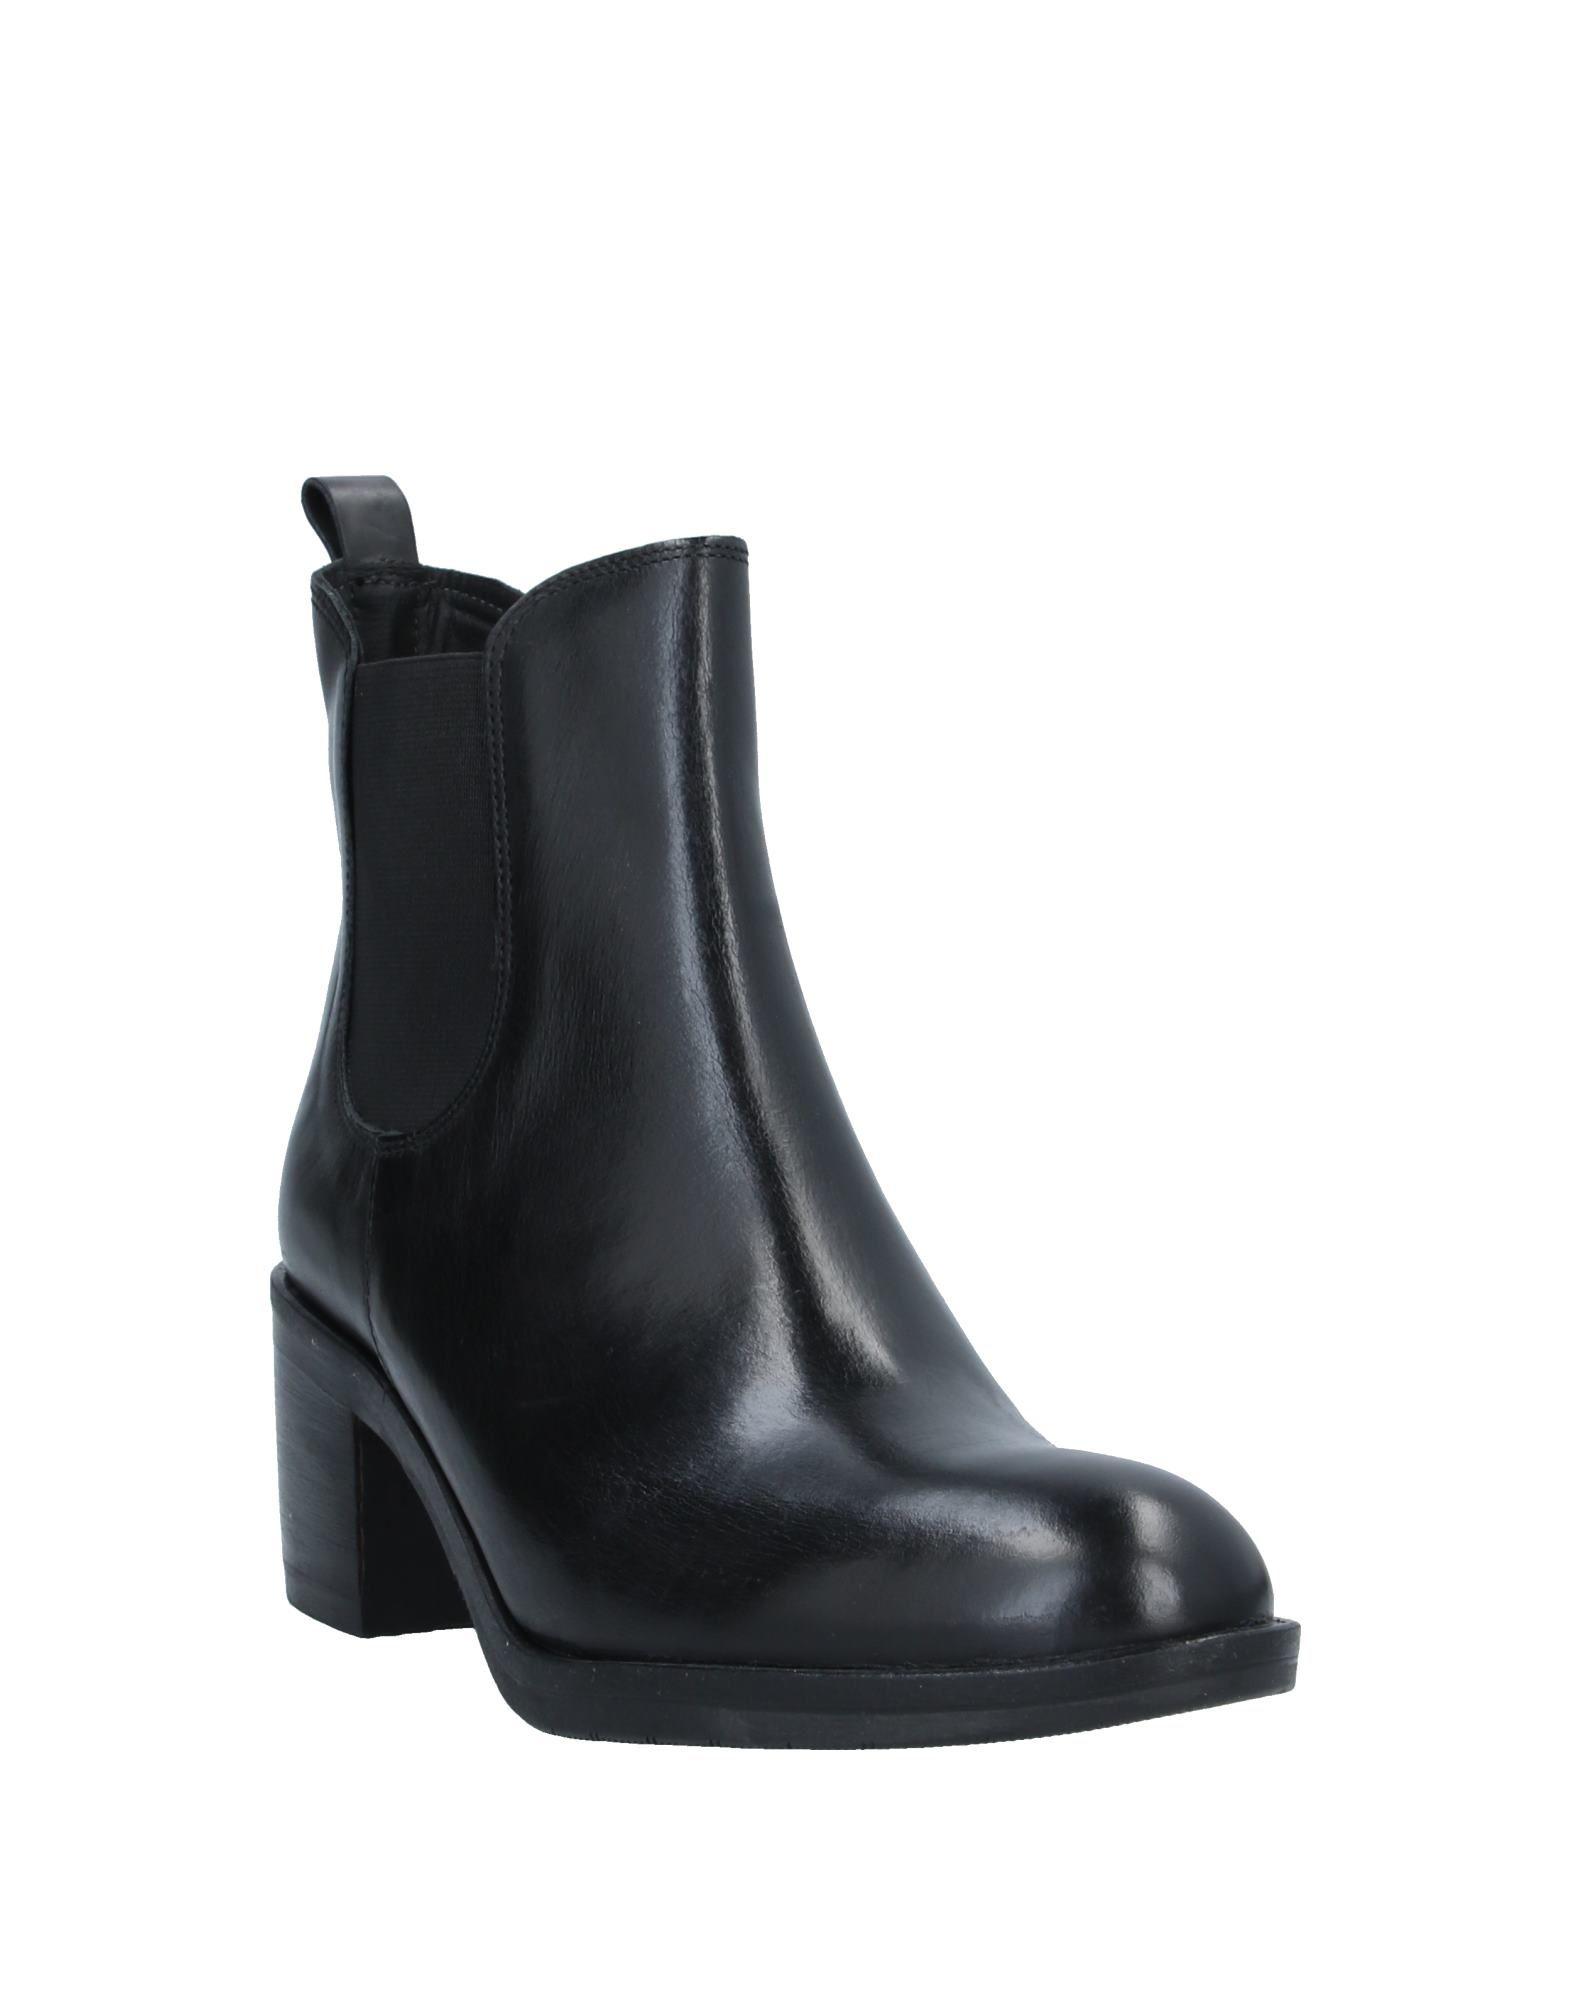 Primadonna Ankle Boots in Black - Lyst